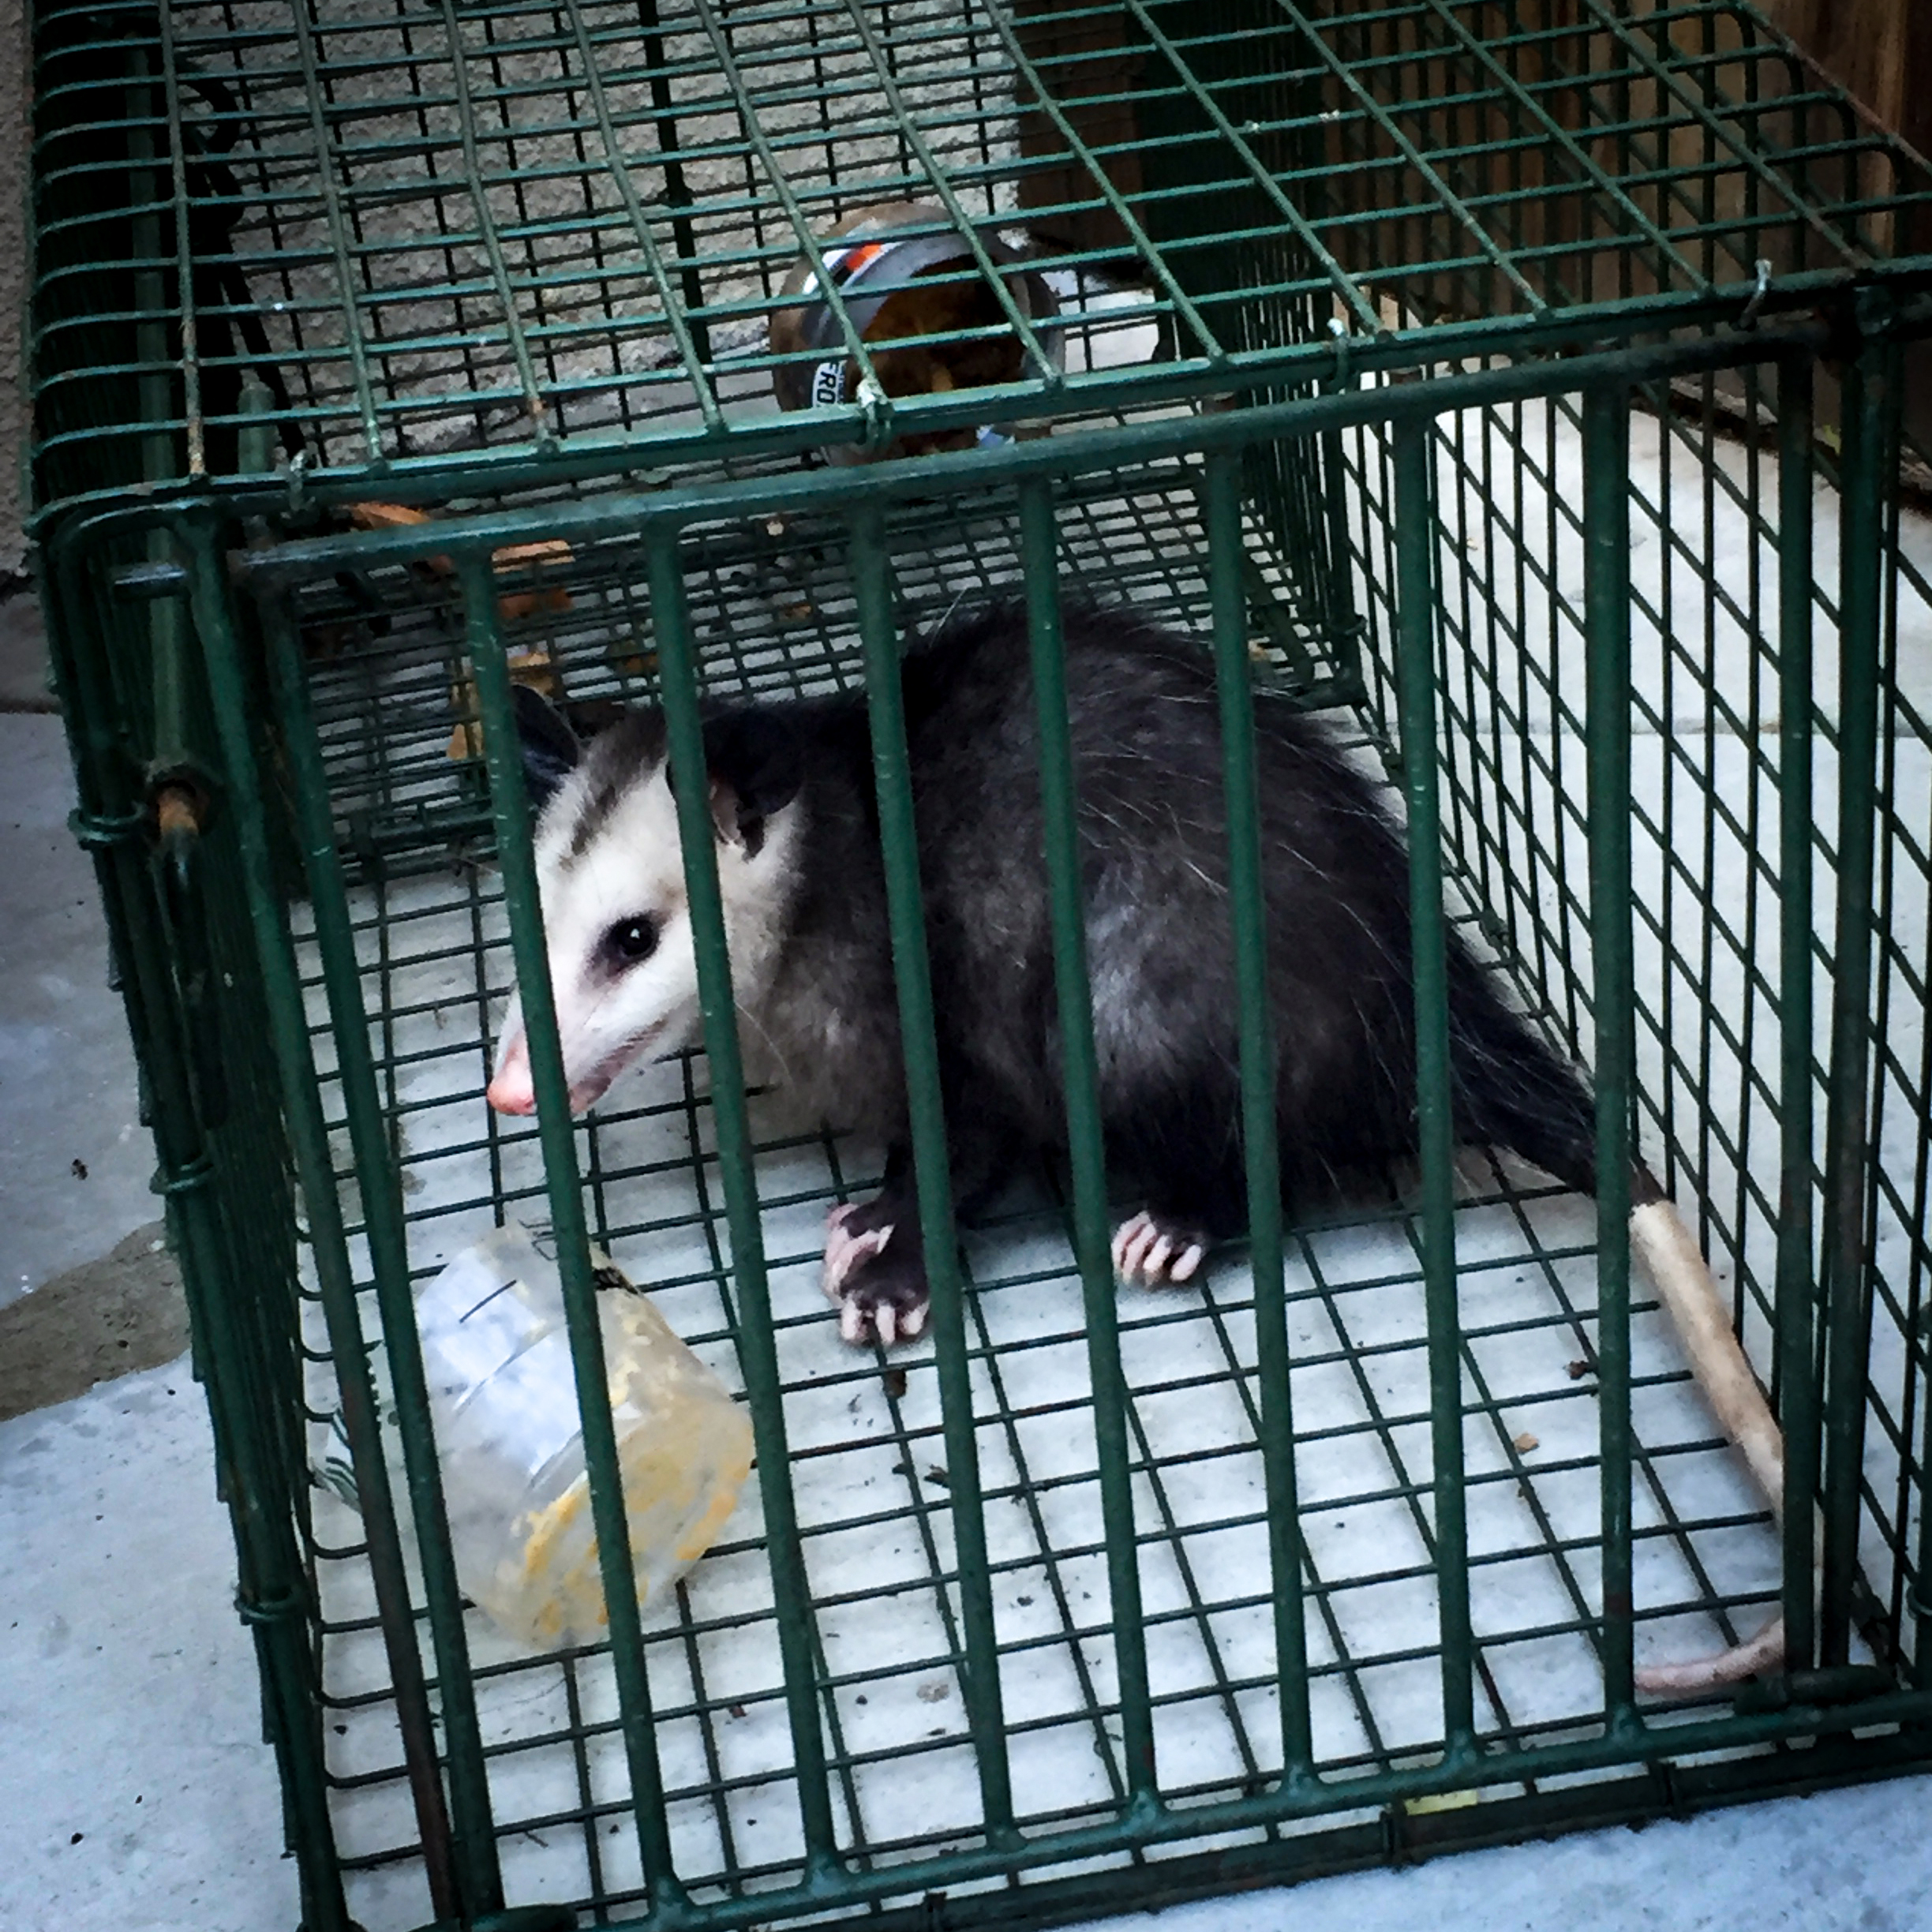 OPOSSUM TRAPPING AND REMOVAL – All Star Animal Trapping